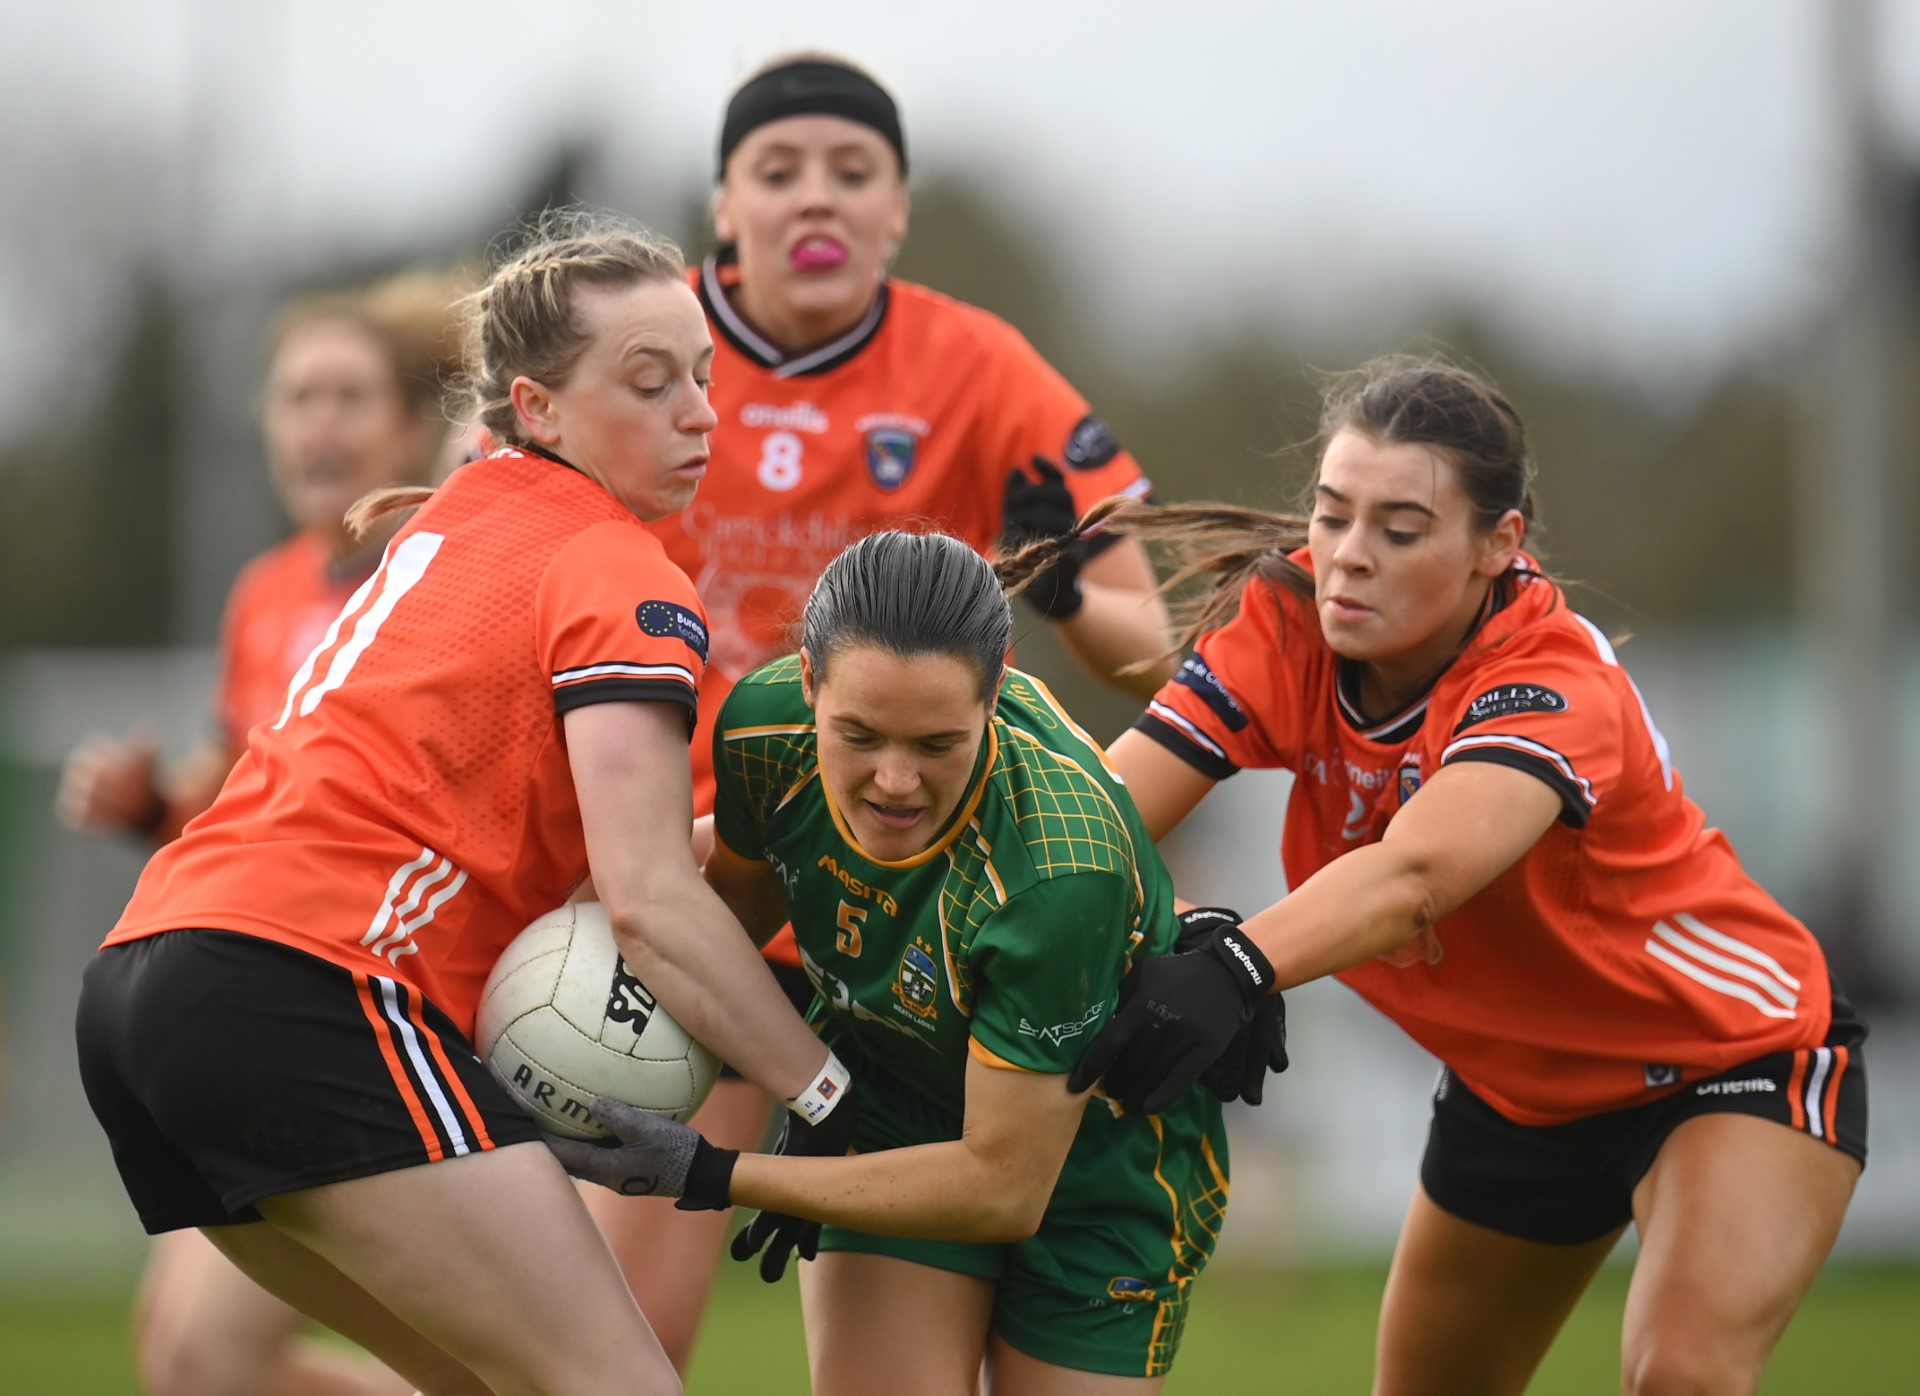 ARMAGH GO TOP OF NATIONAL LEAGUE